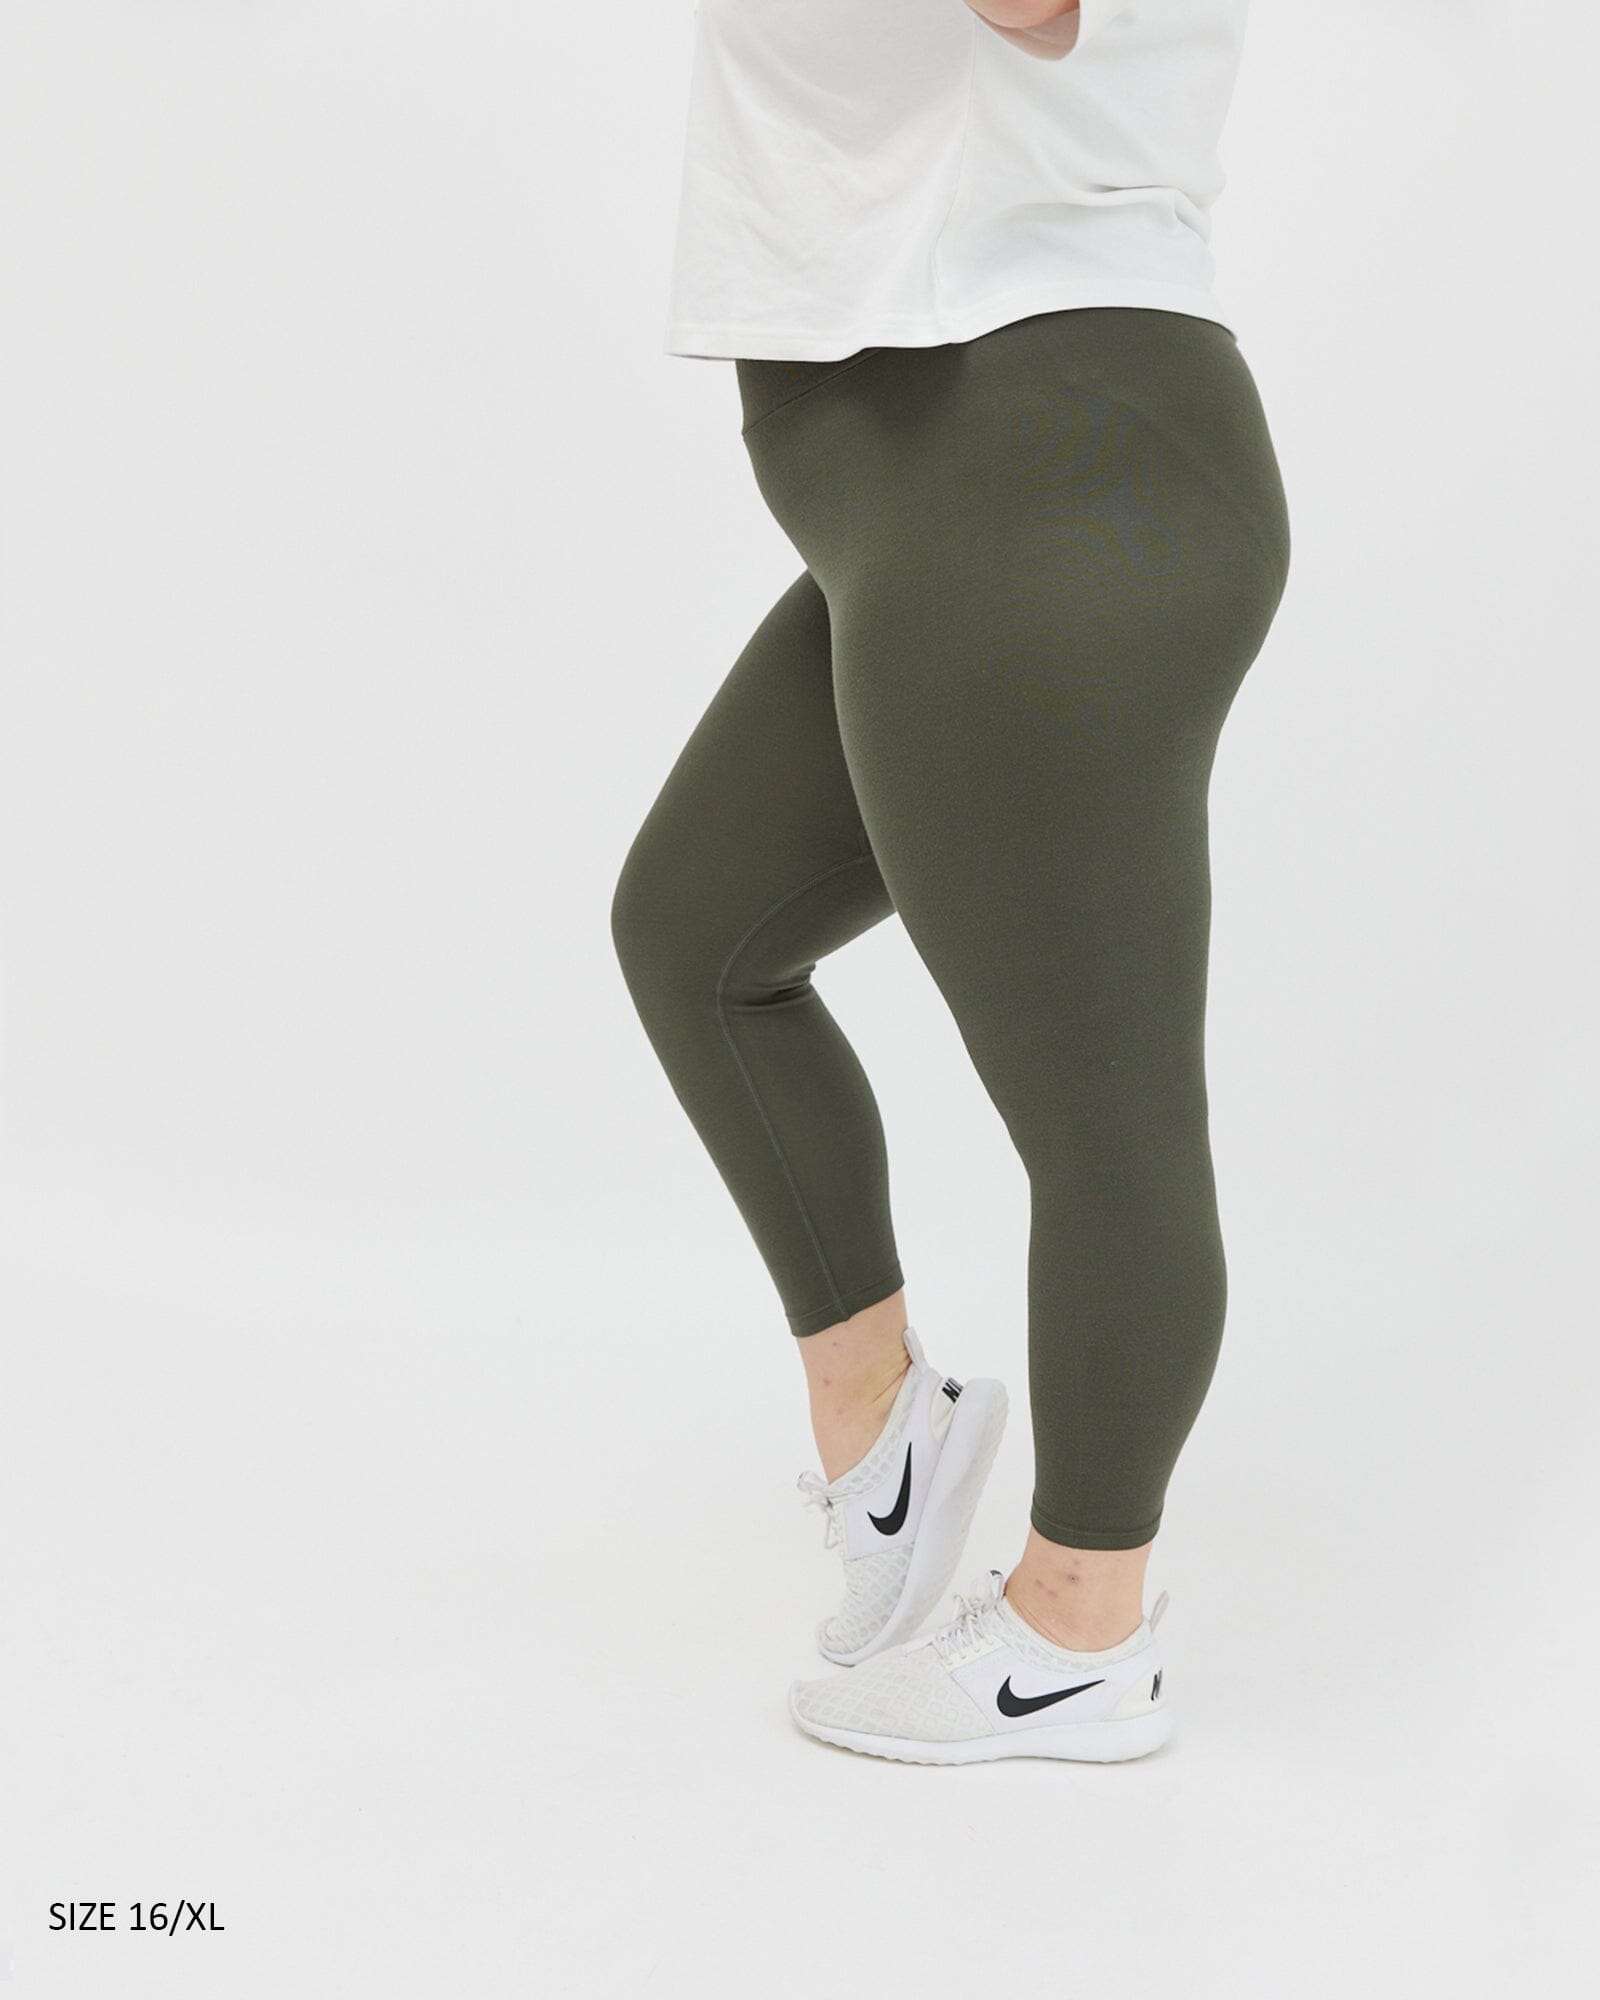 The ultimate comfy leggings - Cropped Moss Leggings Avila the label 16/XL FIRM 